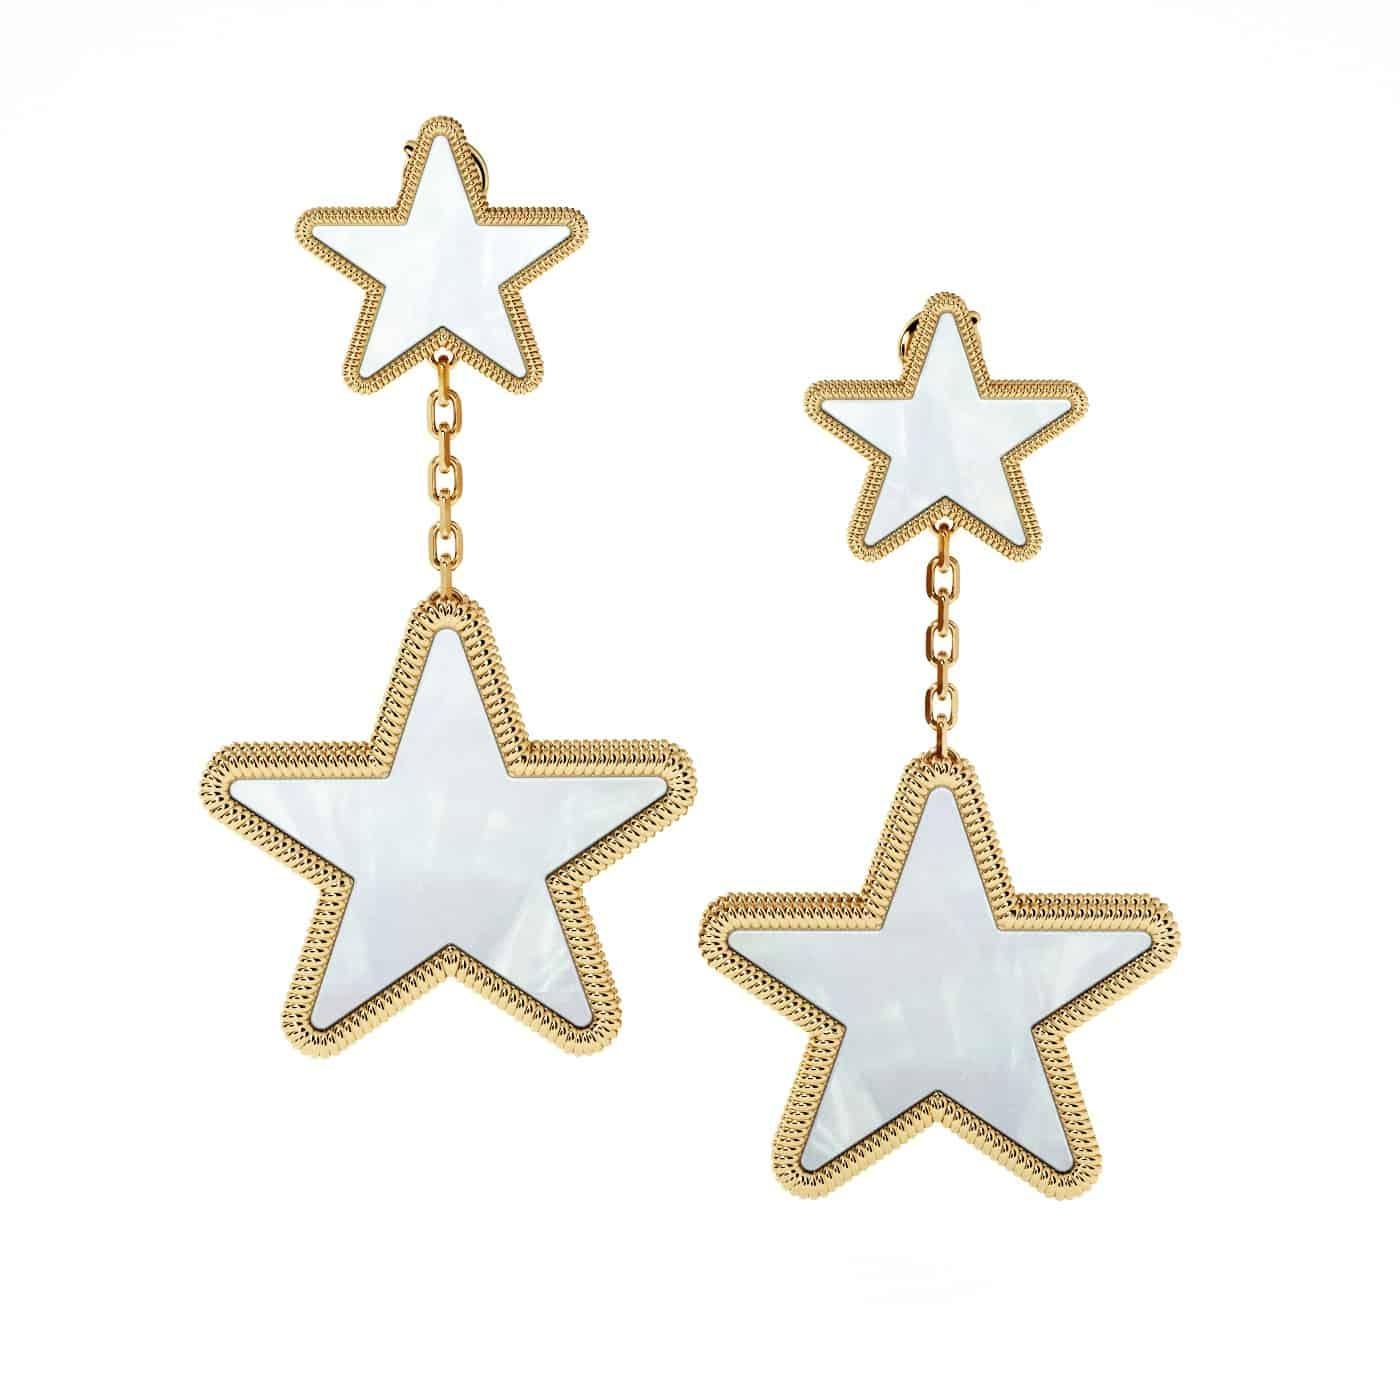 Each striking & spangled star is precisely carved from natural gemstones and encased in a beautiful solid gold rope finish with no visible prongs, creating a one-of-a-kind piece that brings double the luck and confidence to its wearer

18 Karat